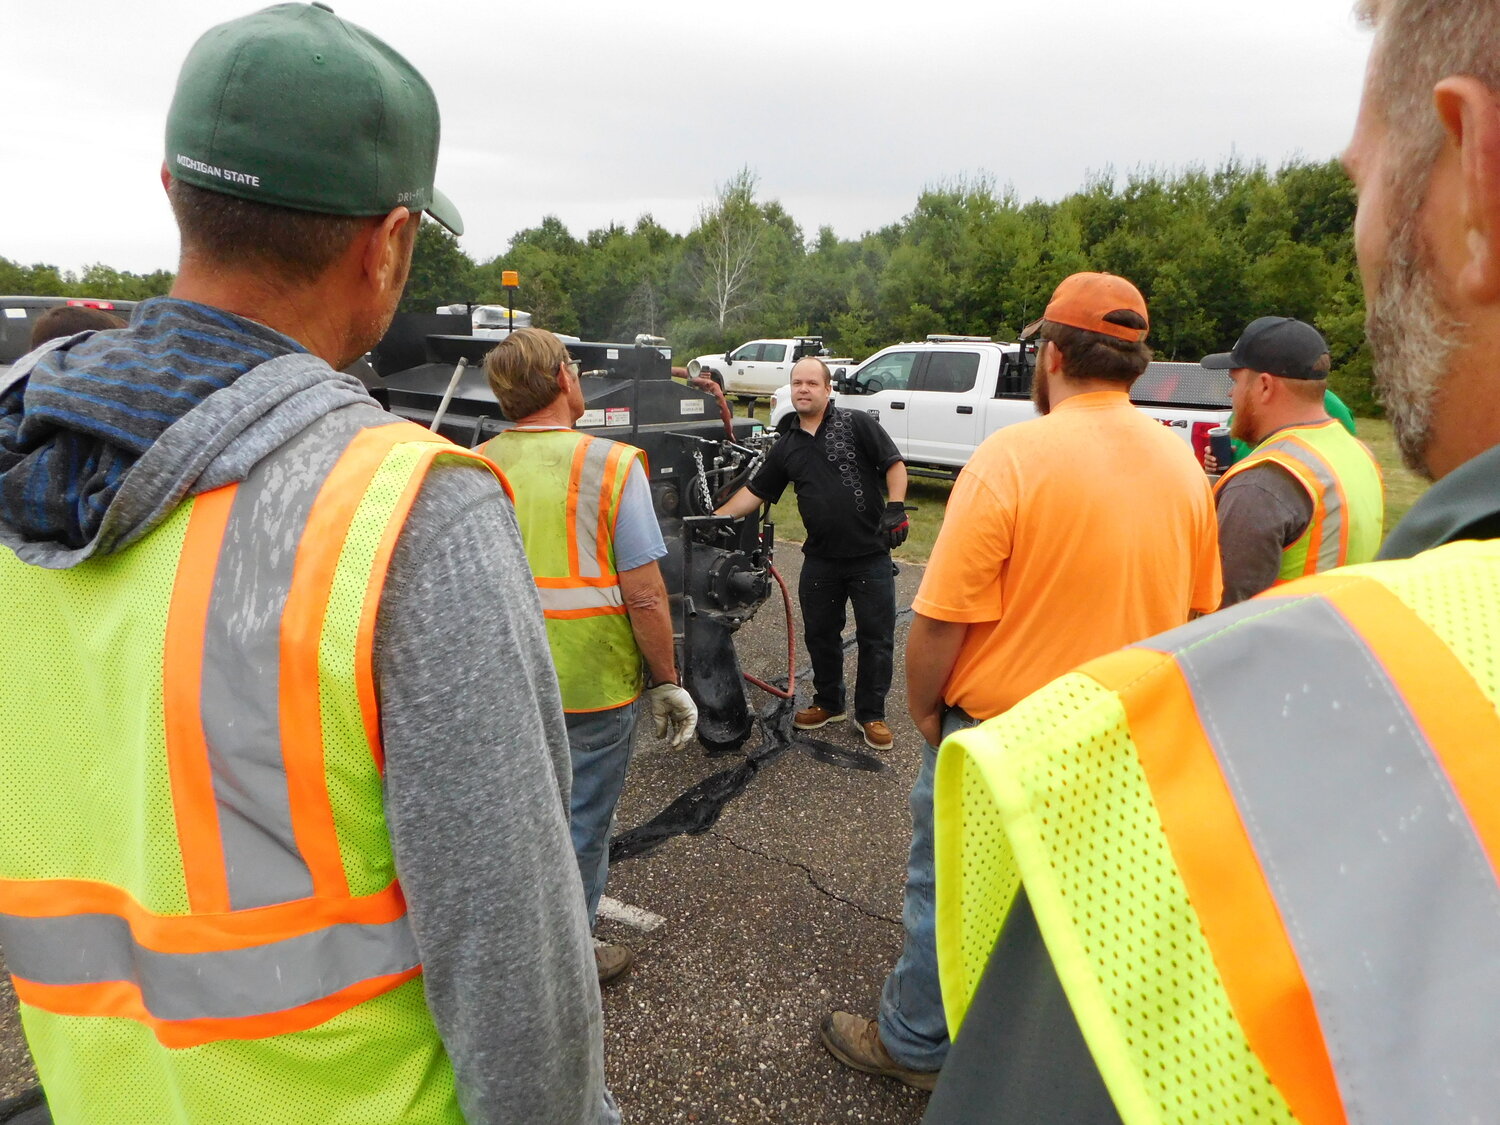 Representatives from Clare, Gladwin and Midland counties, along with the City of Clare, pay close attention to the product and machine demonstration presented Tuesday, Aug. 22 at Clare County Airport 80D.